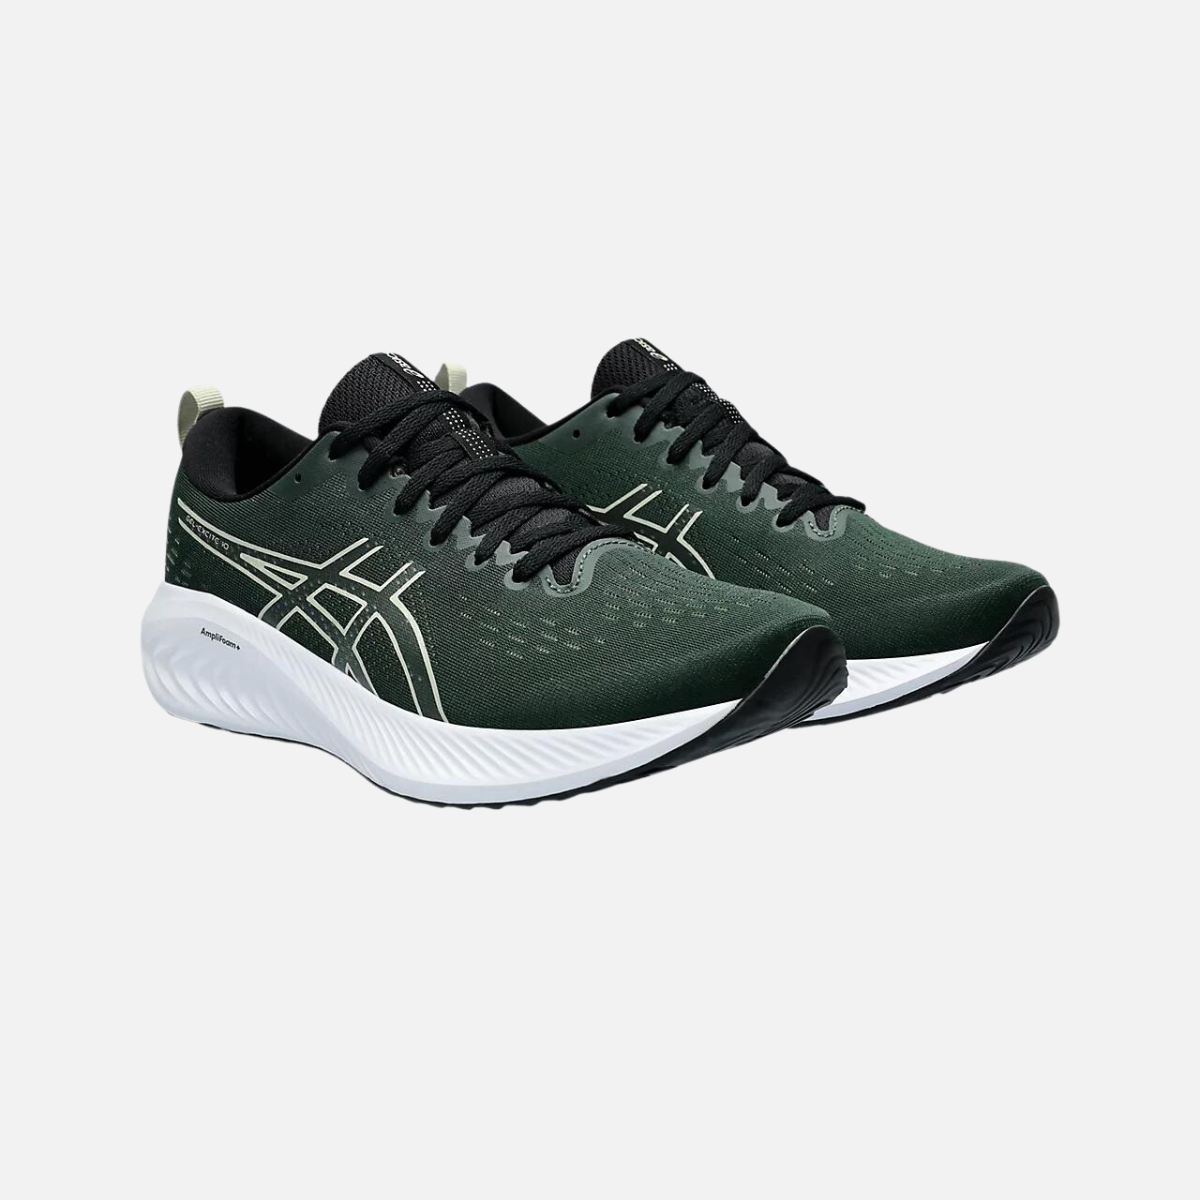 Asics Gel-Excite 10 Men's Running Shoes - Rain Forest/Dried Leaf Green